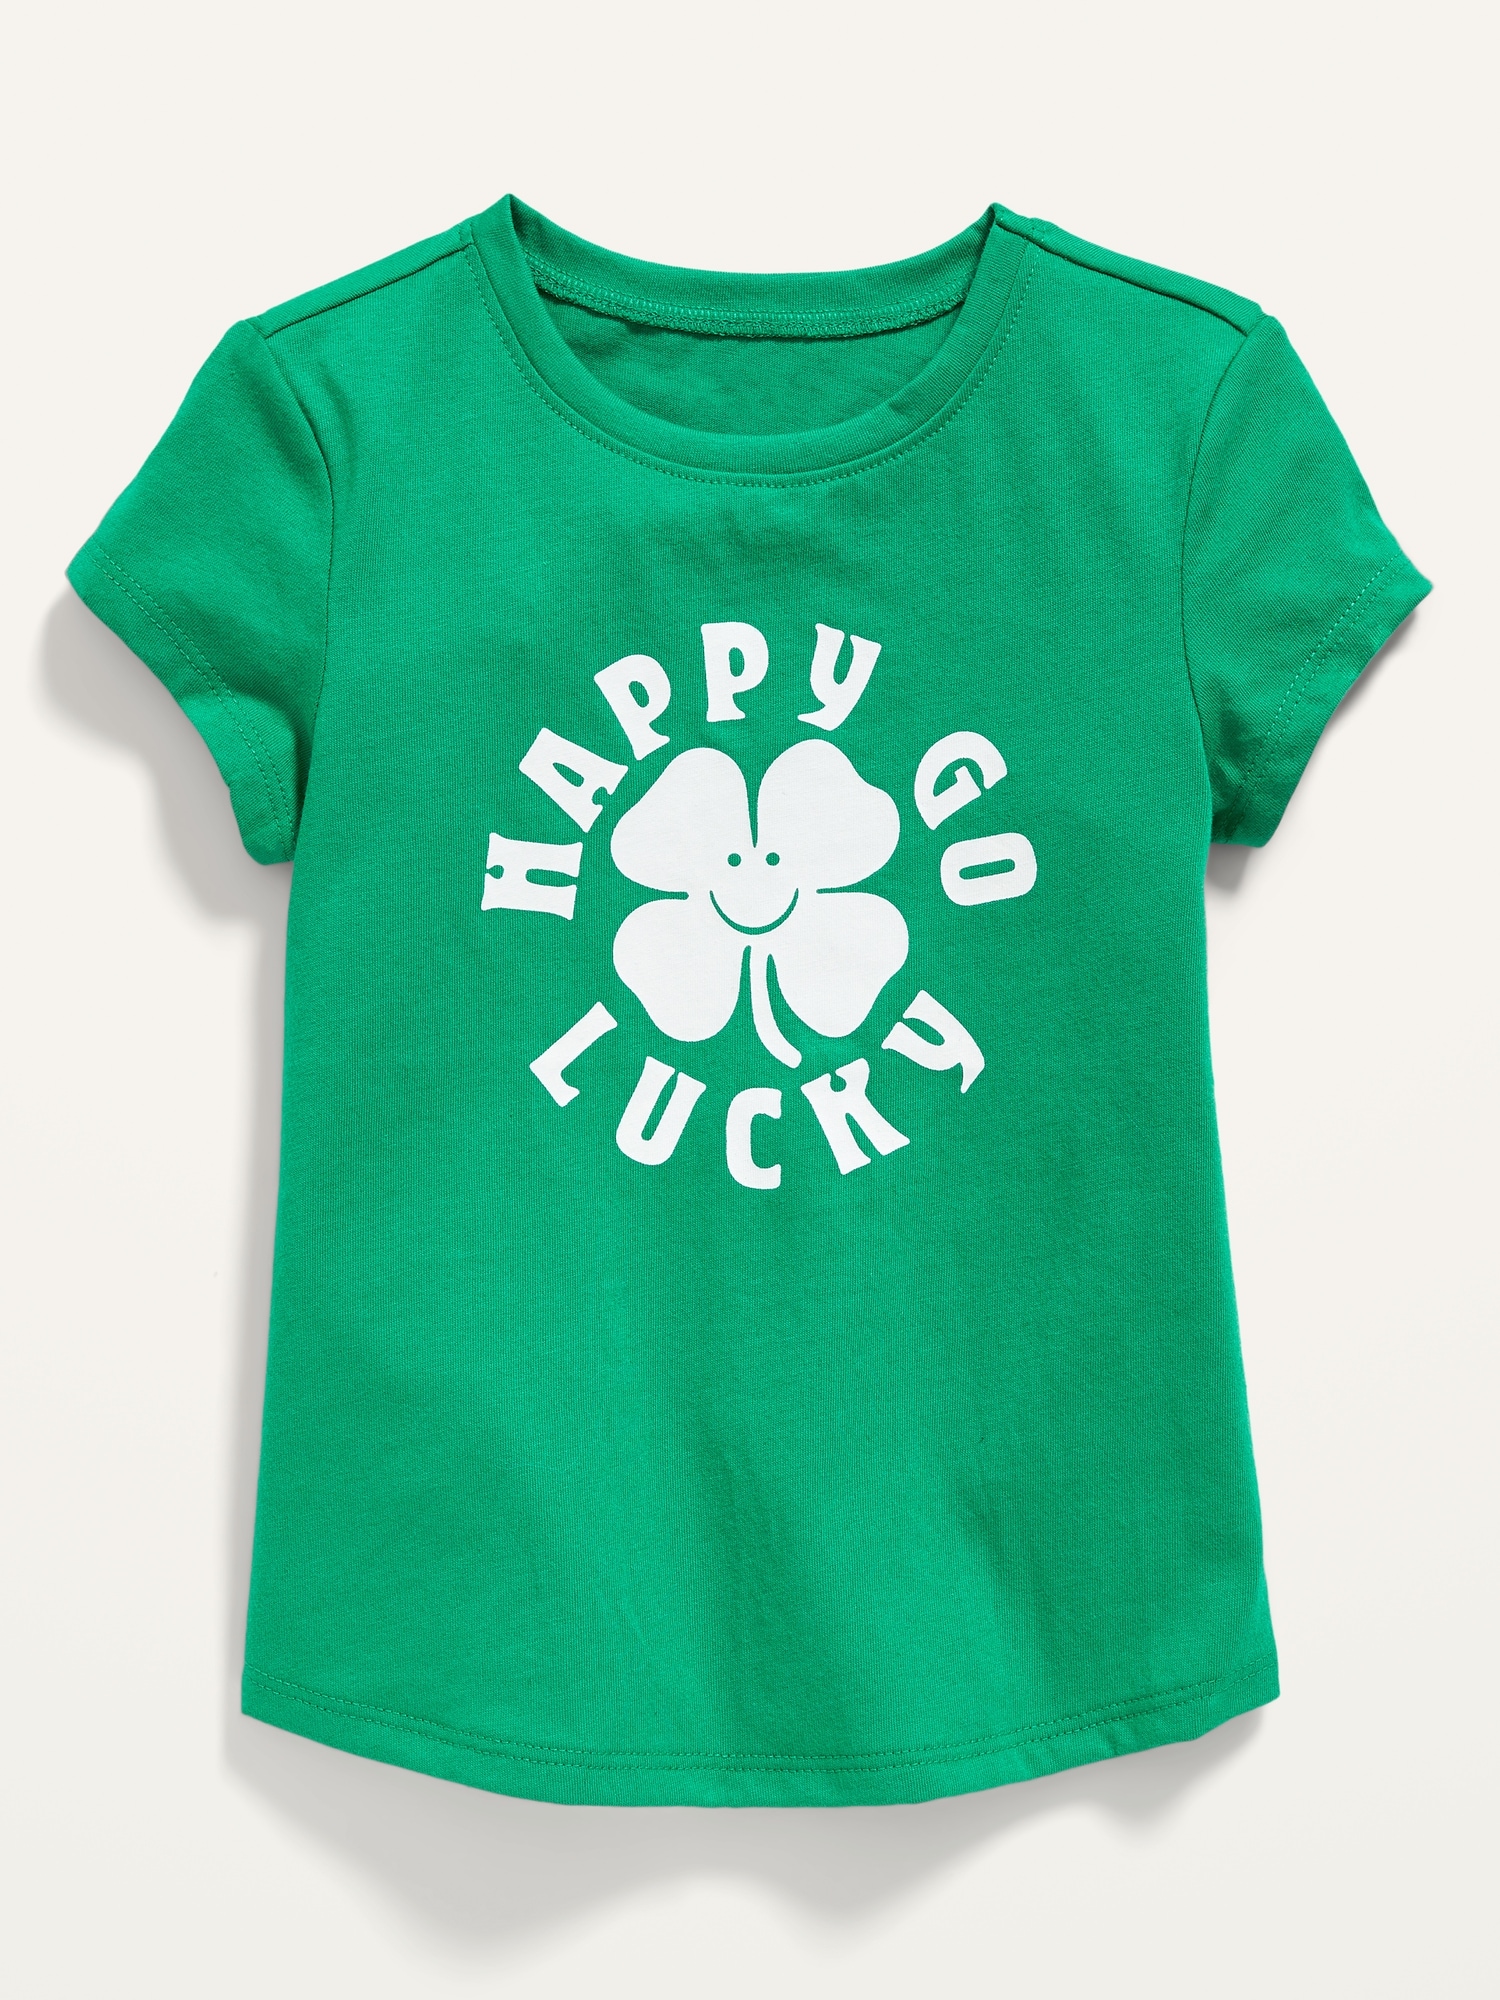 Unisex St. Patrick's Day Graphic Tee for Toddler